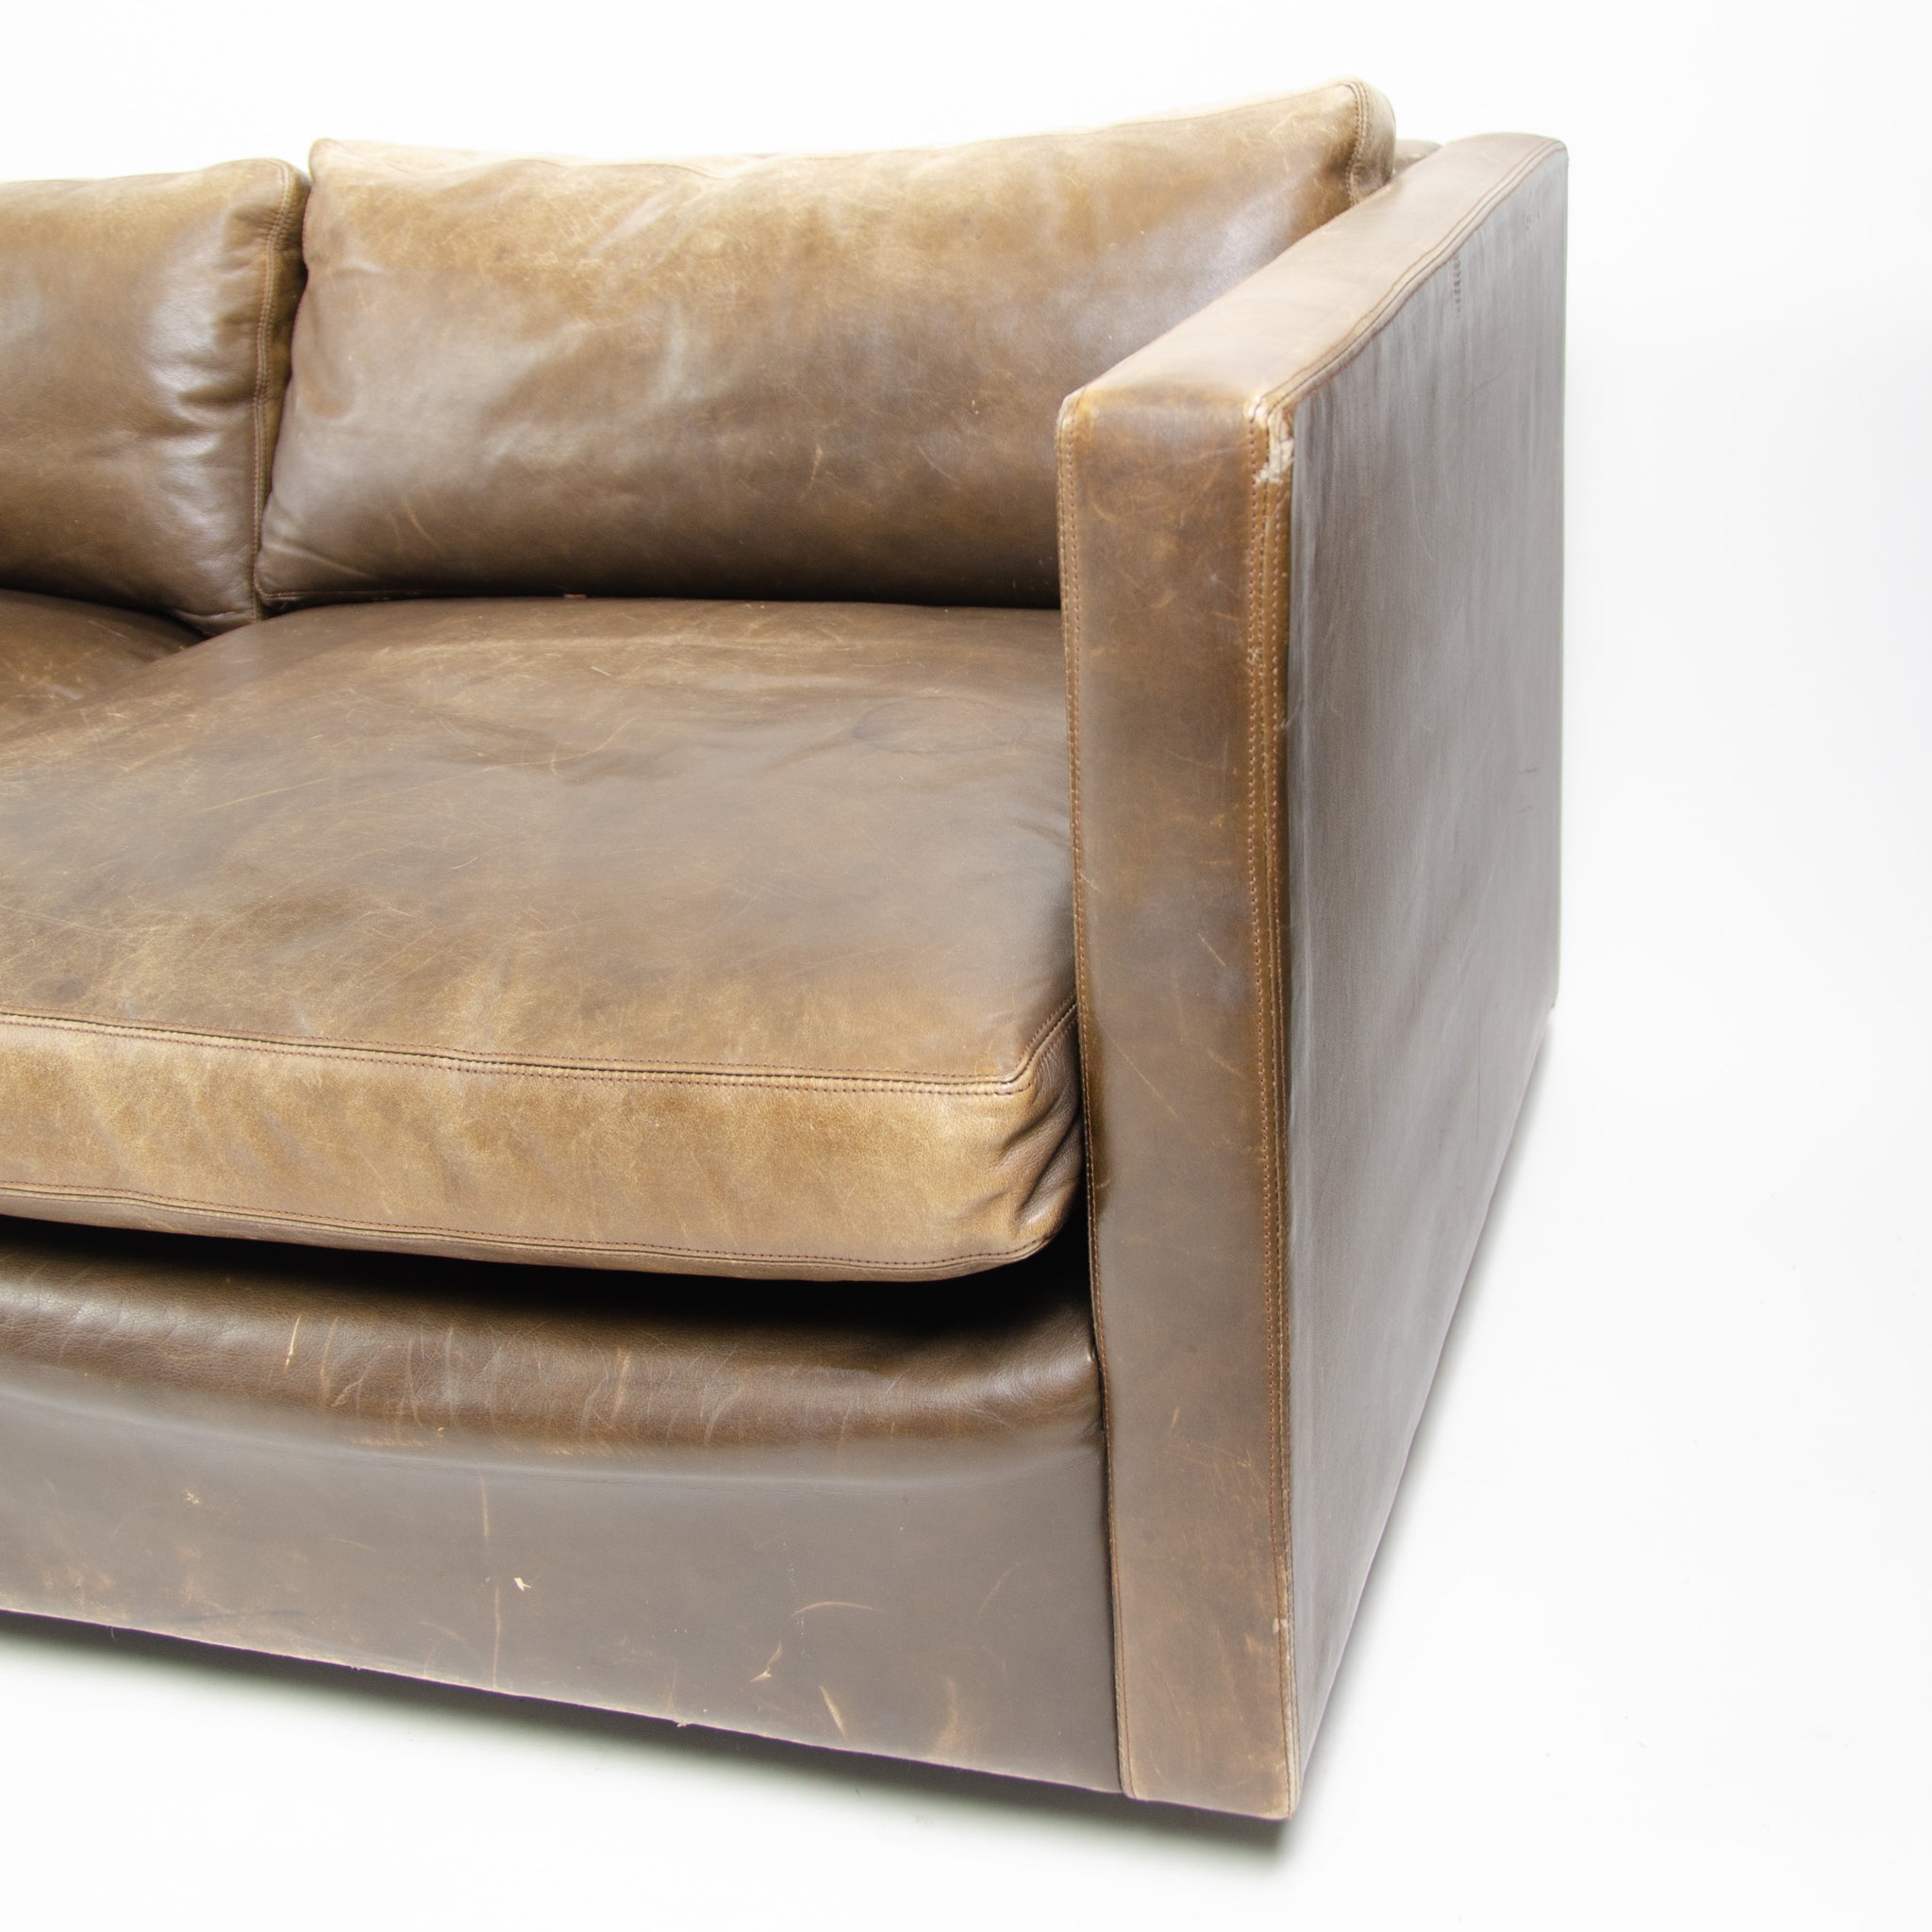 SOLD 1978 Knoll Charles Pfister Brown Leather Sofa